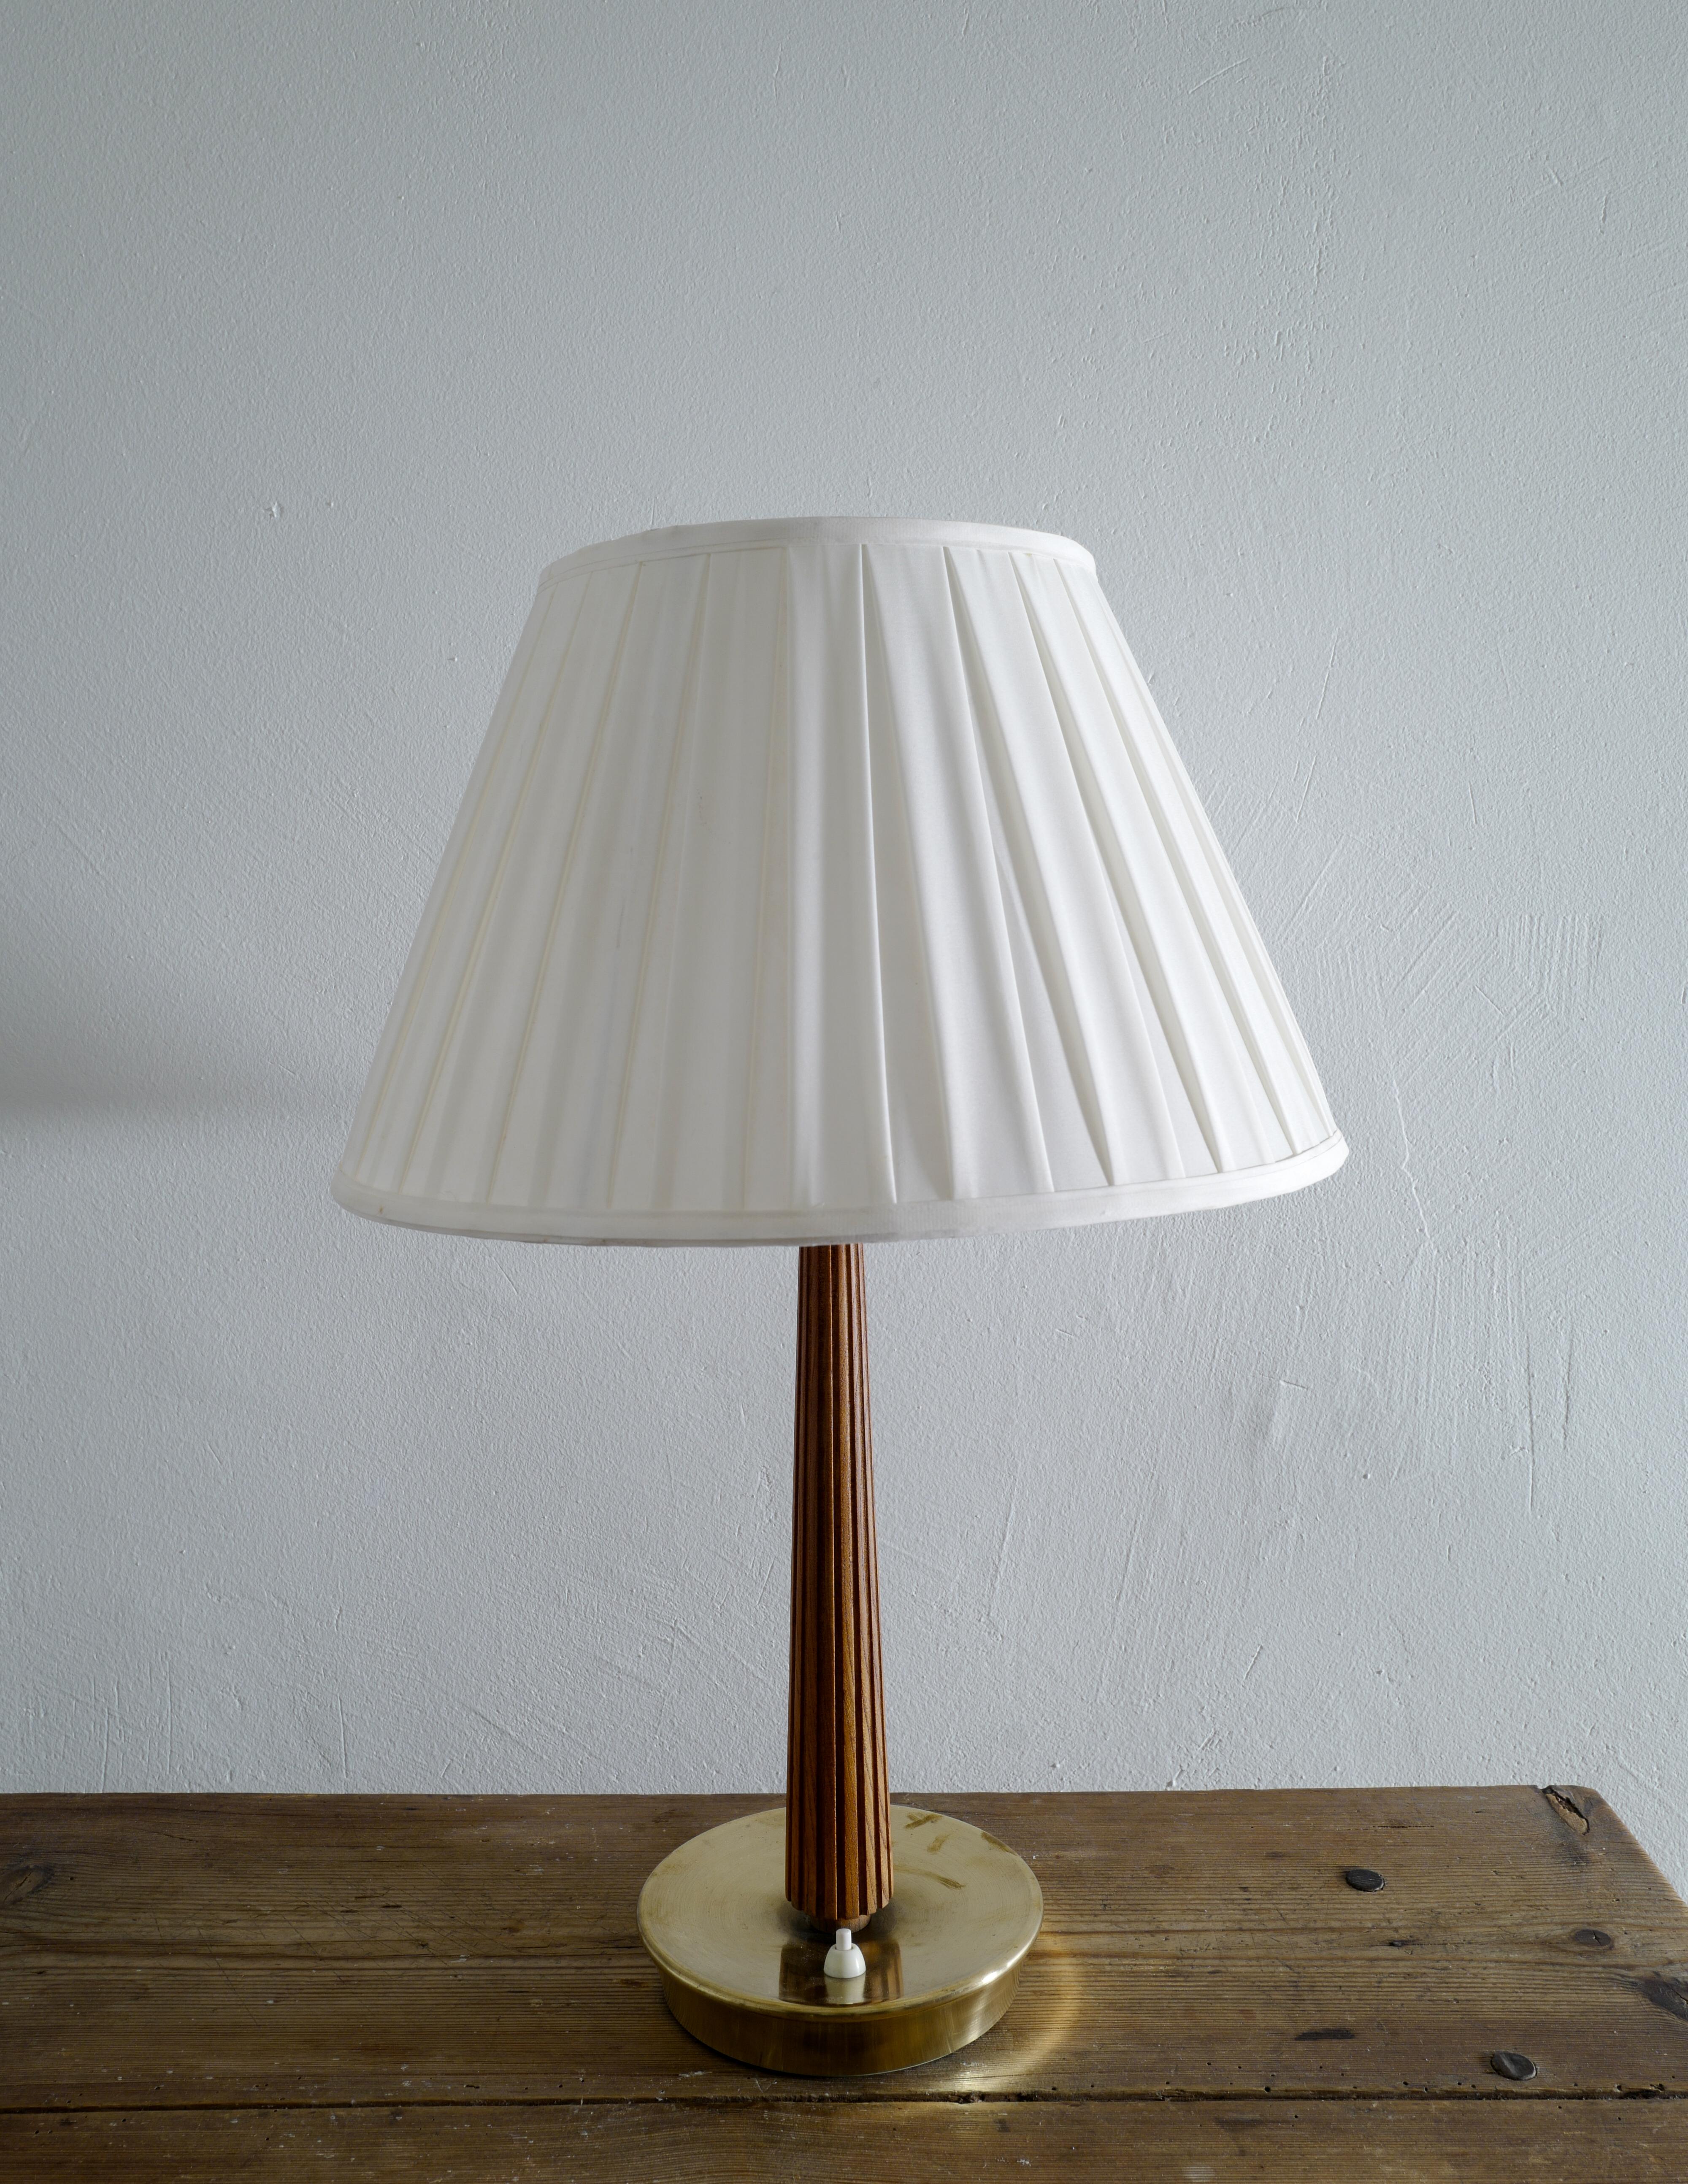 Rare table lamp in stained oak and brass designed by Hans Bergström and produced by ASEA in Sweden. In good and original condition and stamped correctly. The fabric shade is included in the price. 

Measurements: 
With the shade: Height: 58 cm,